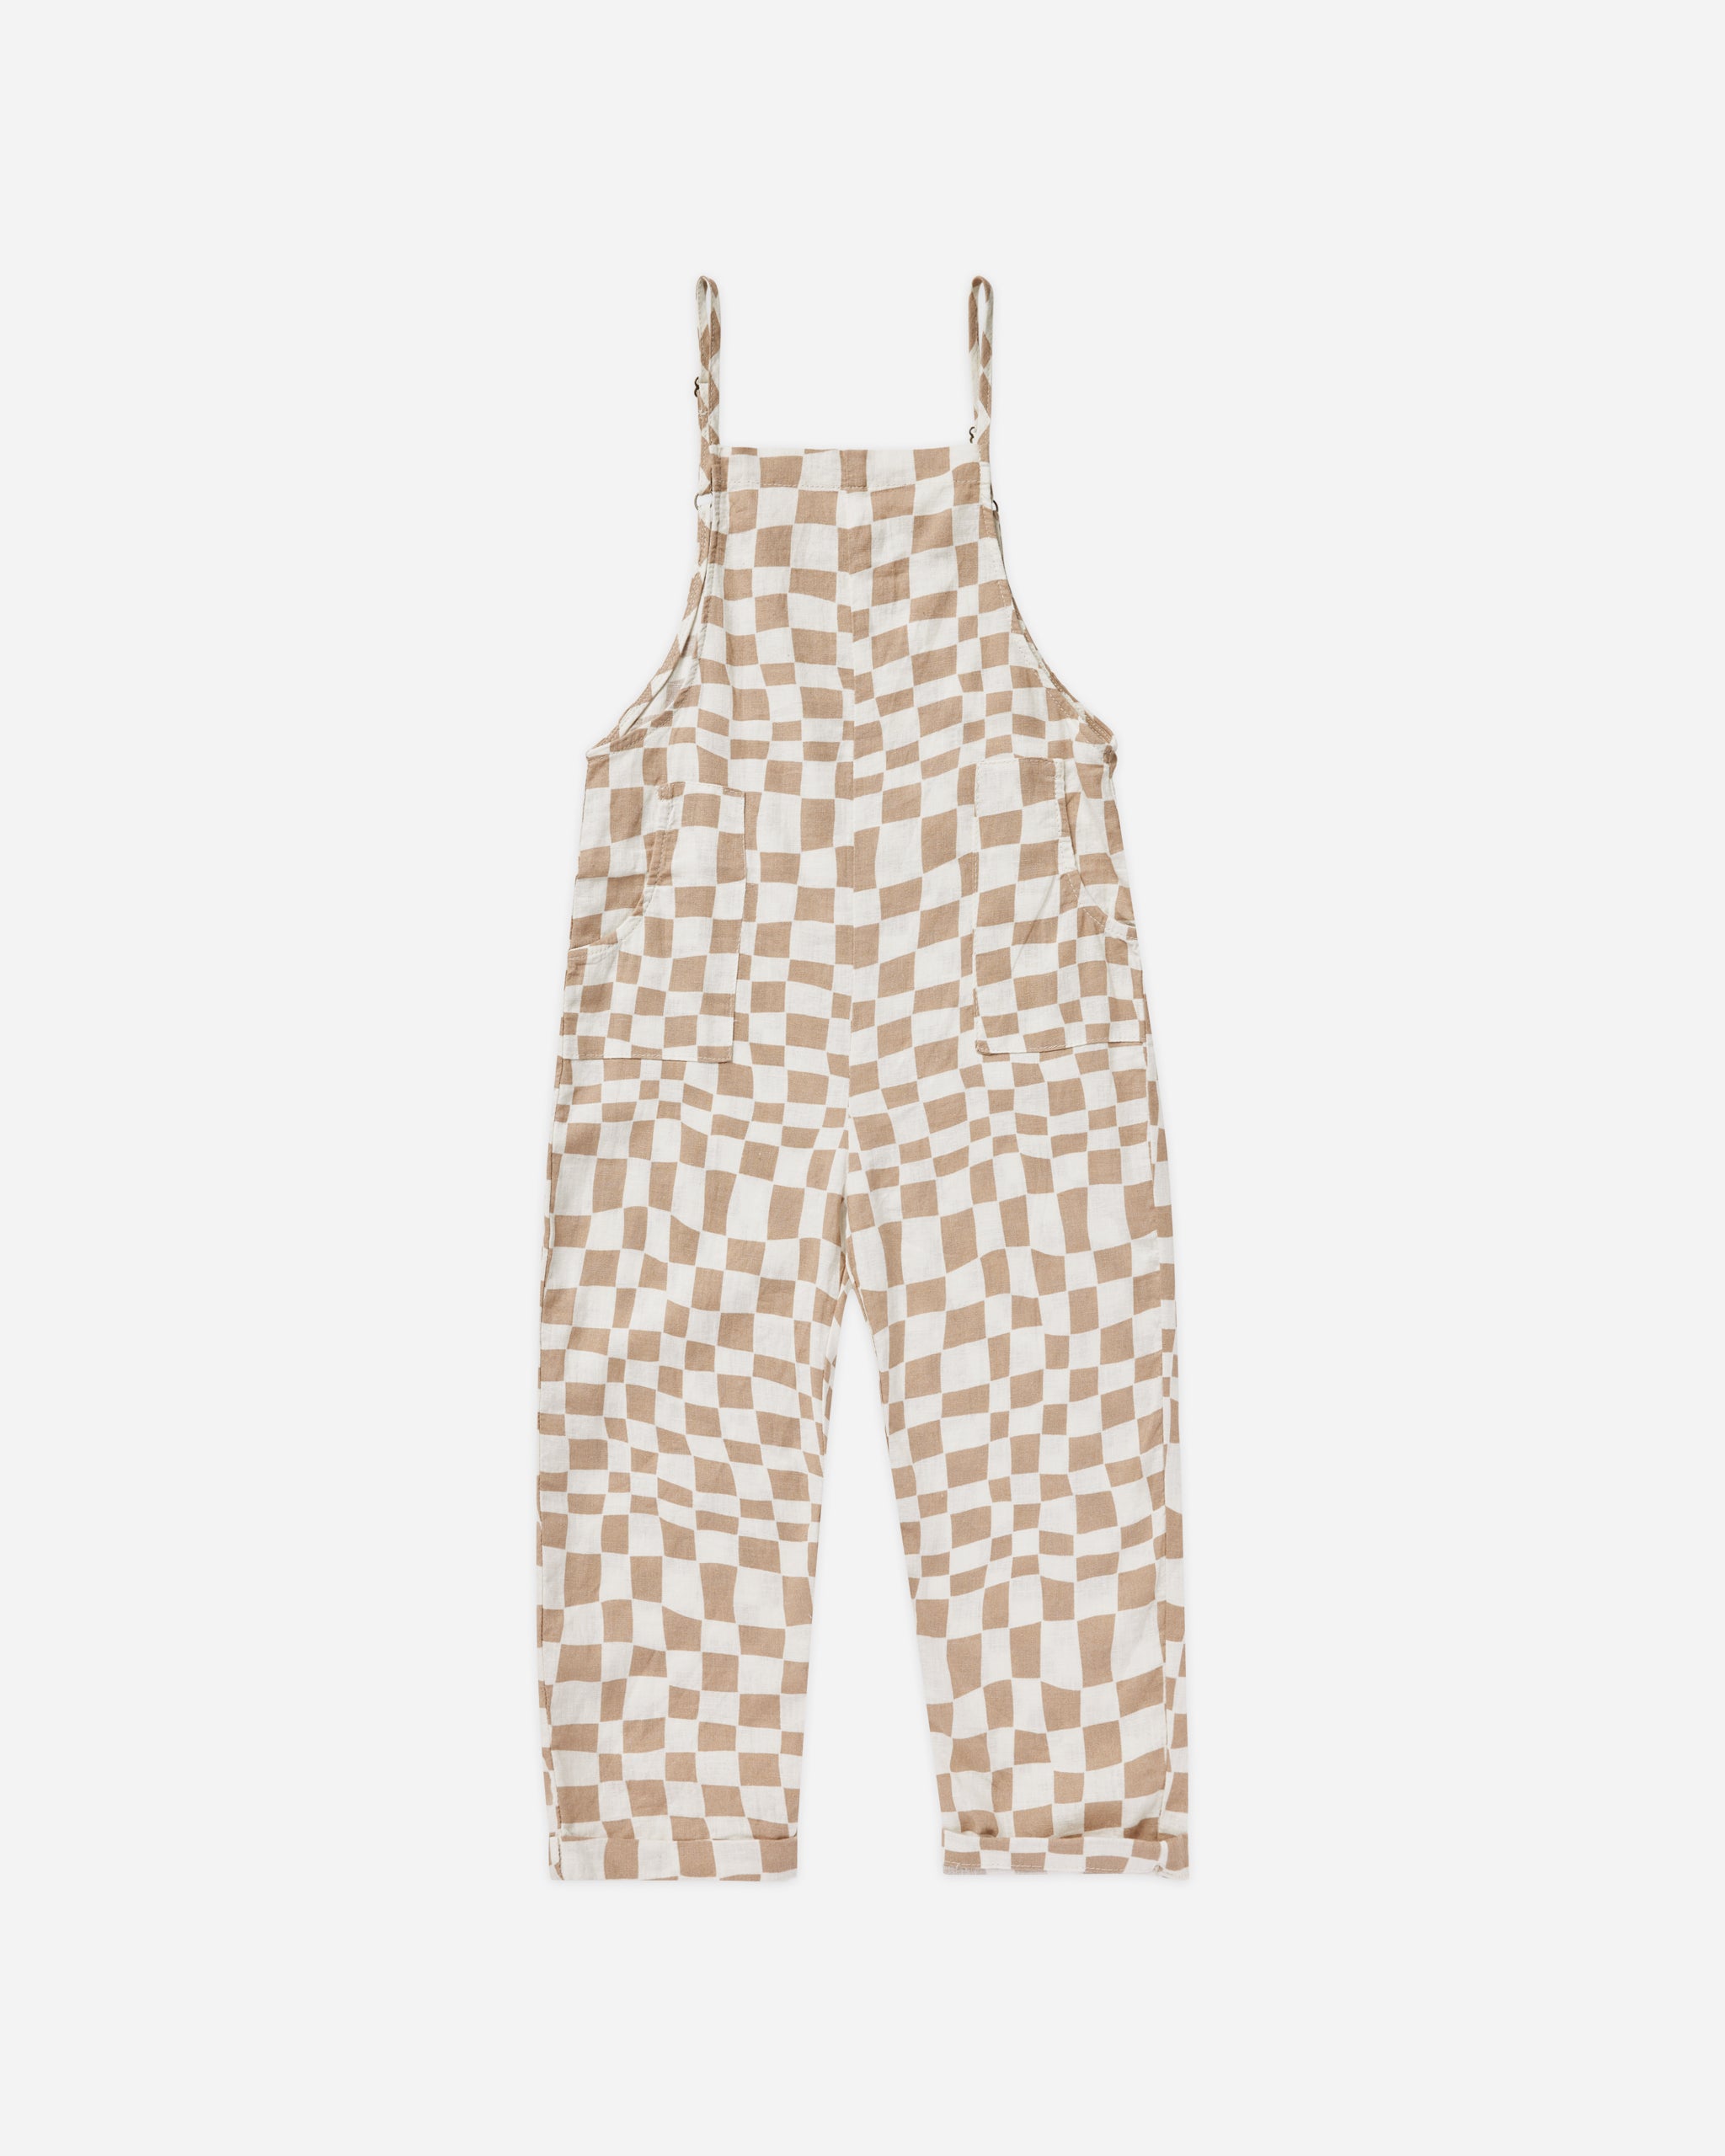 Iris Jumpsuit || Sand Check - Rylee + Cru | Kids Clothes | Trendy Baby Clothes | Modern Infant Outfits |